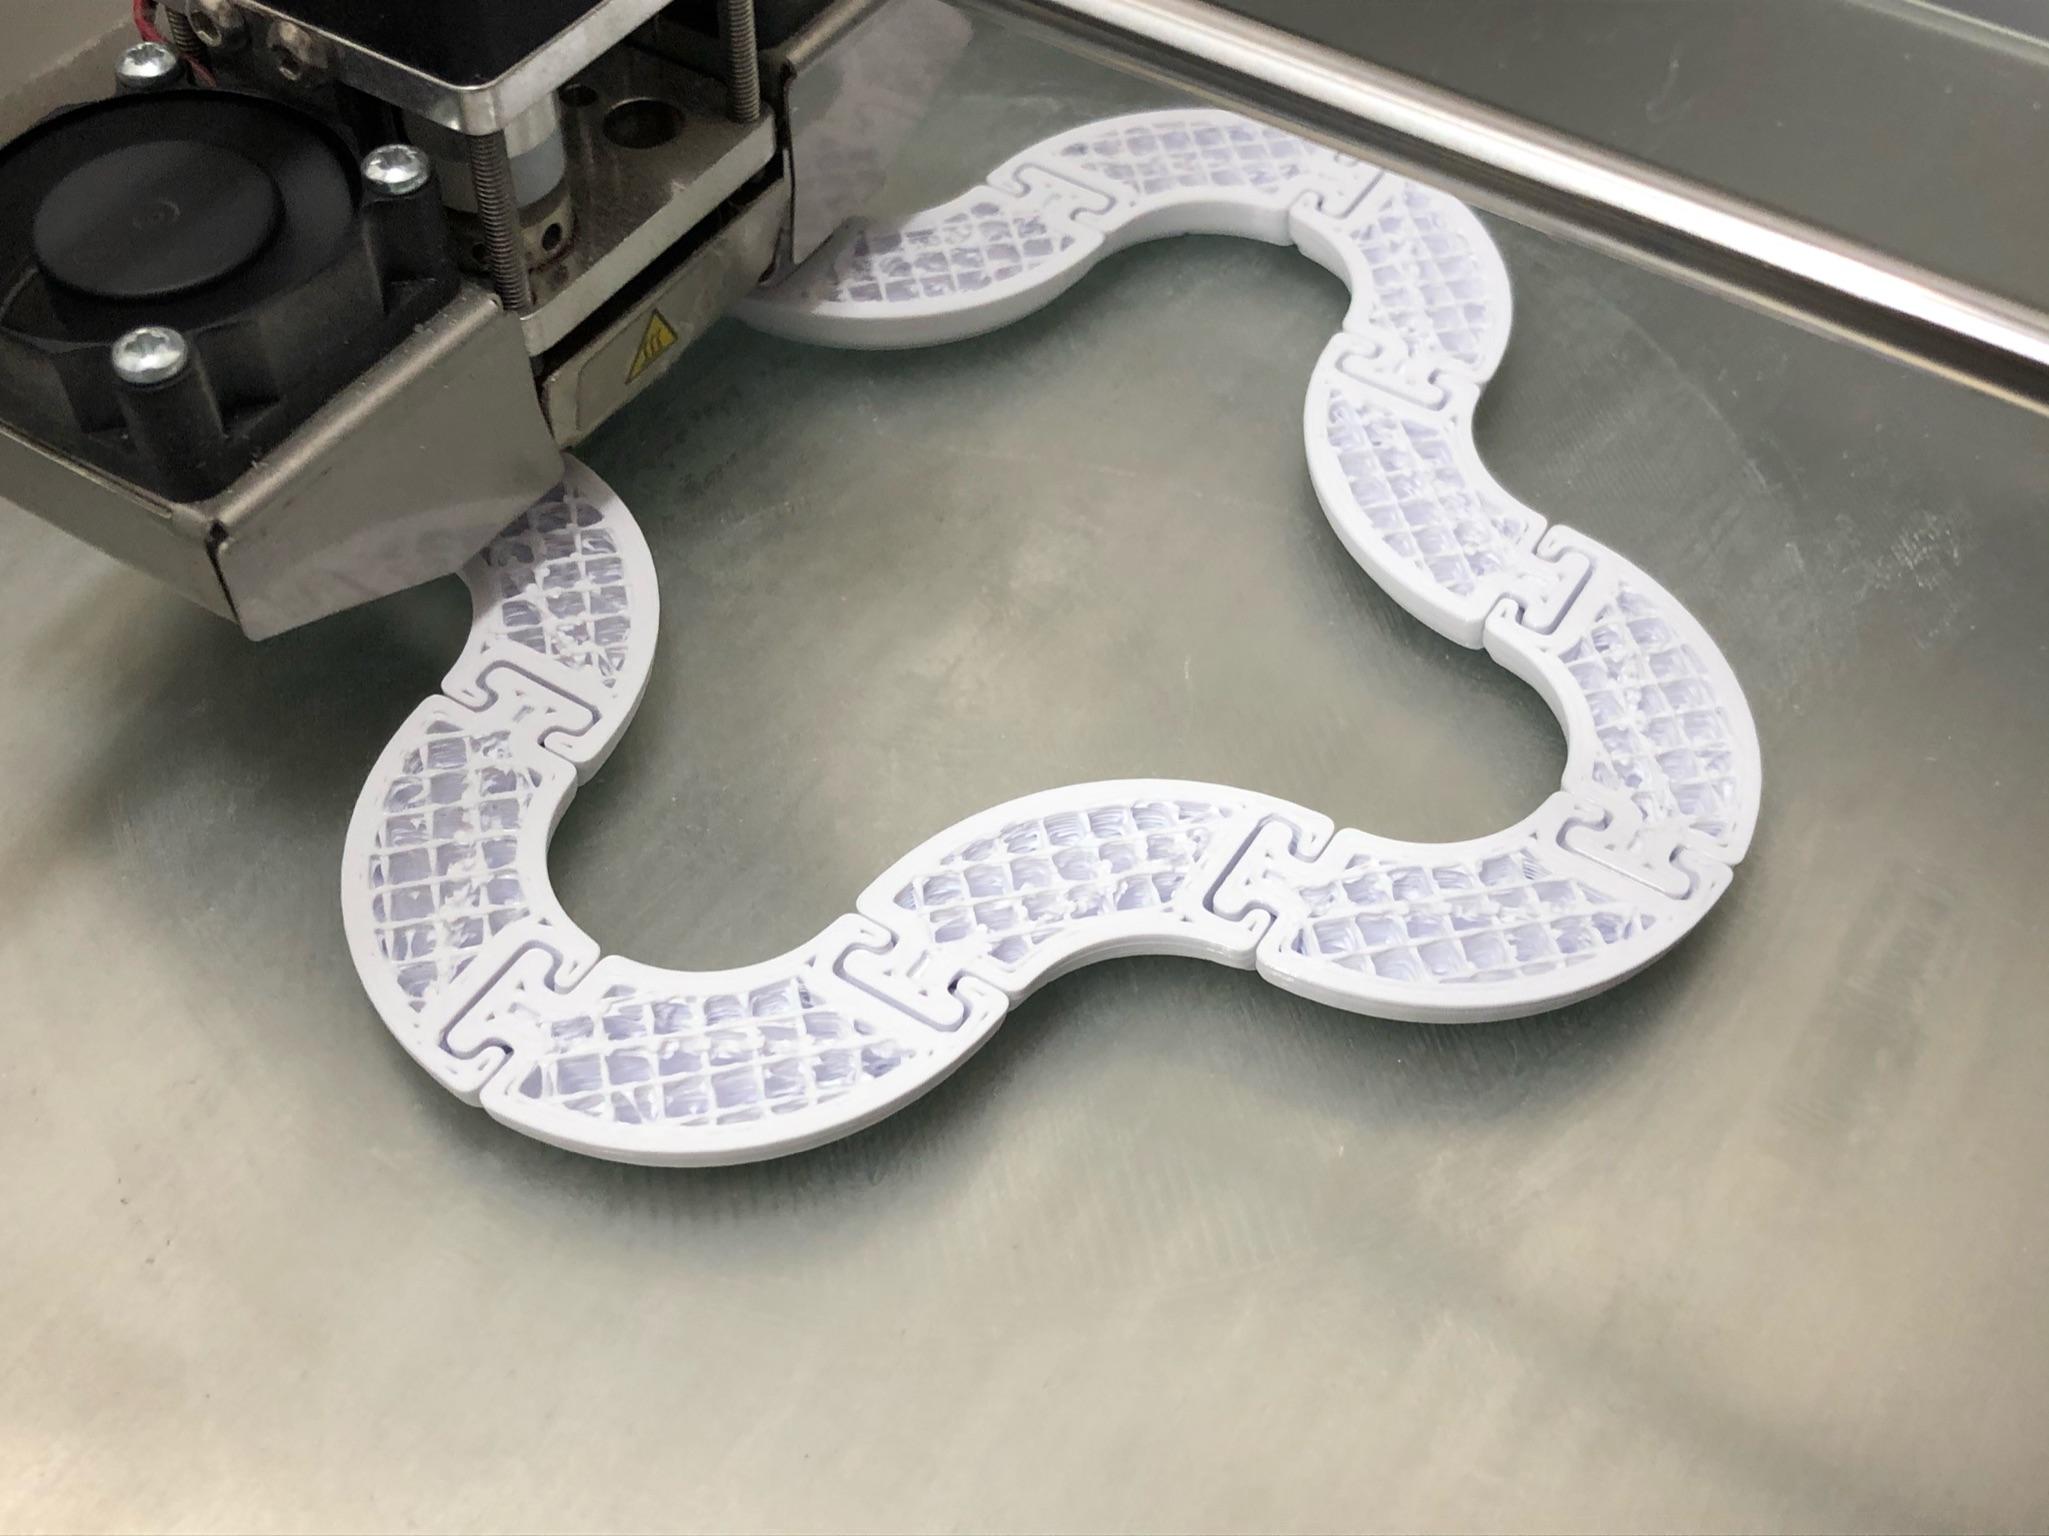 Twisty Tubes - Mid-print picture showing print-in-place design - 3d model